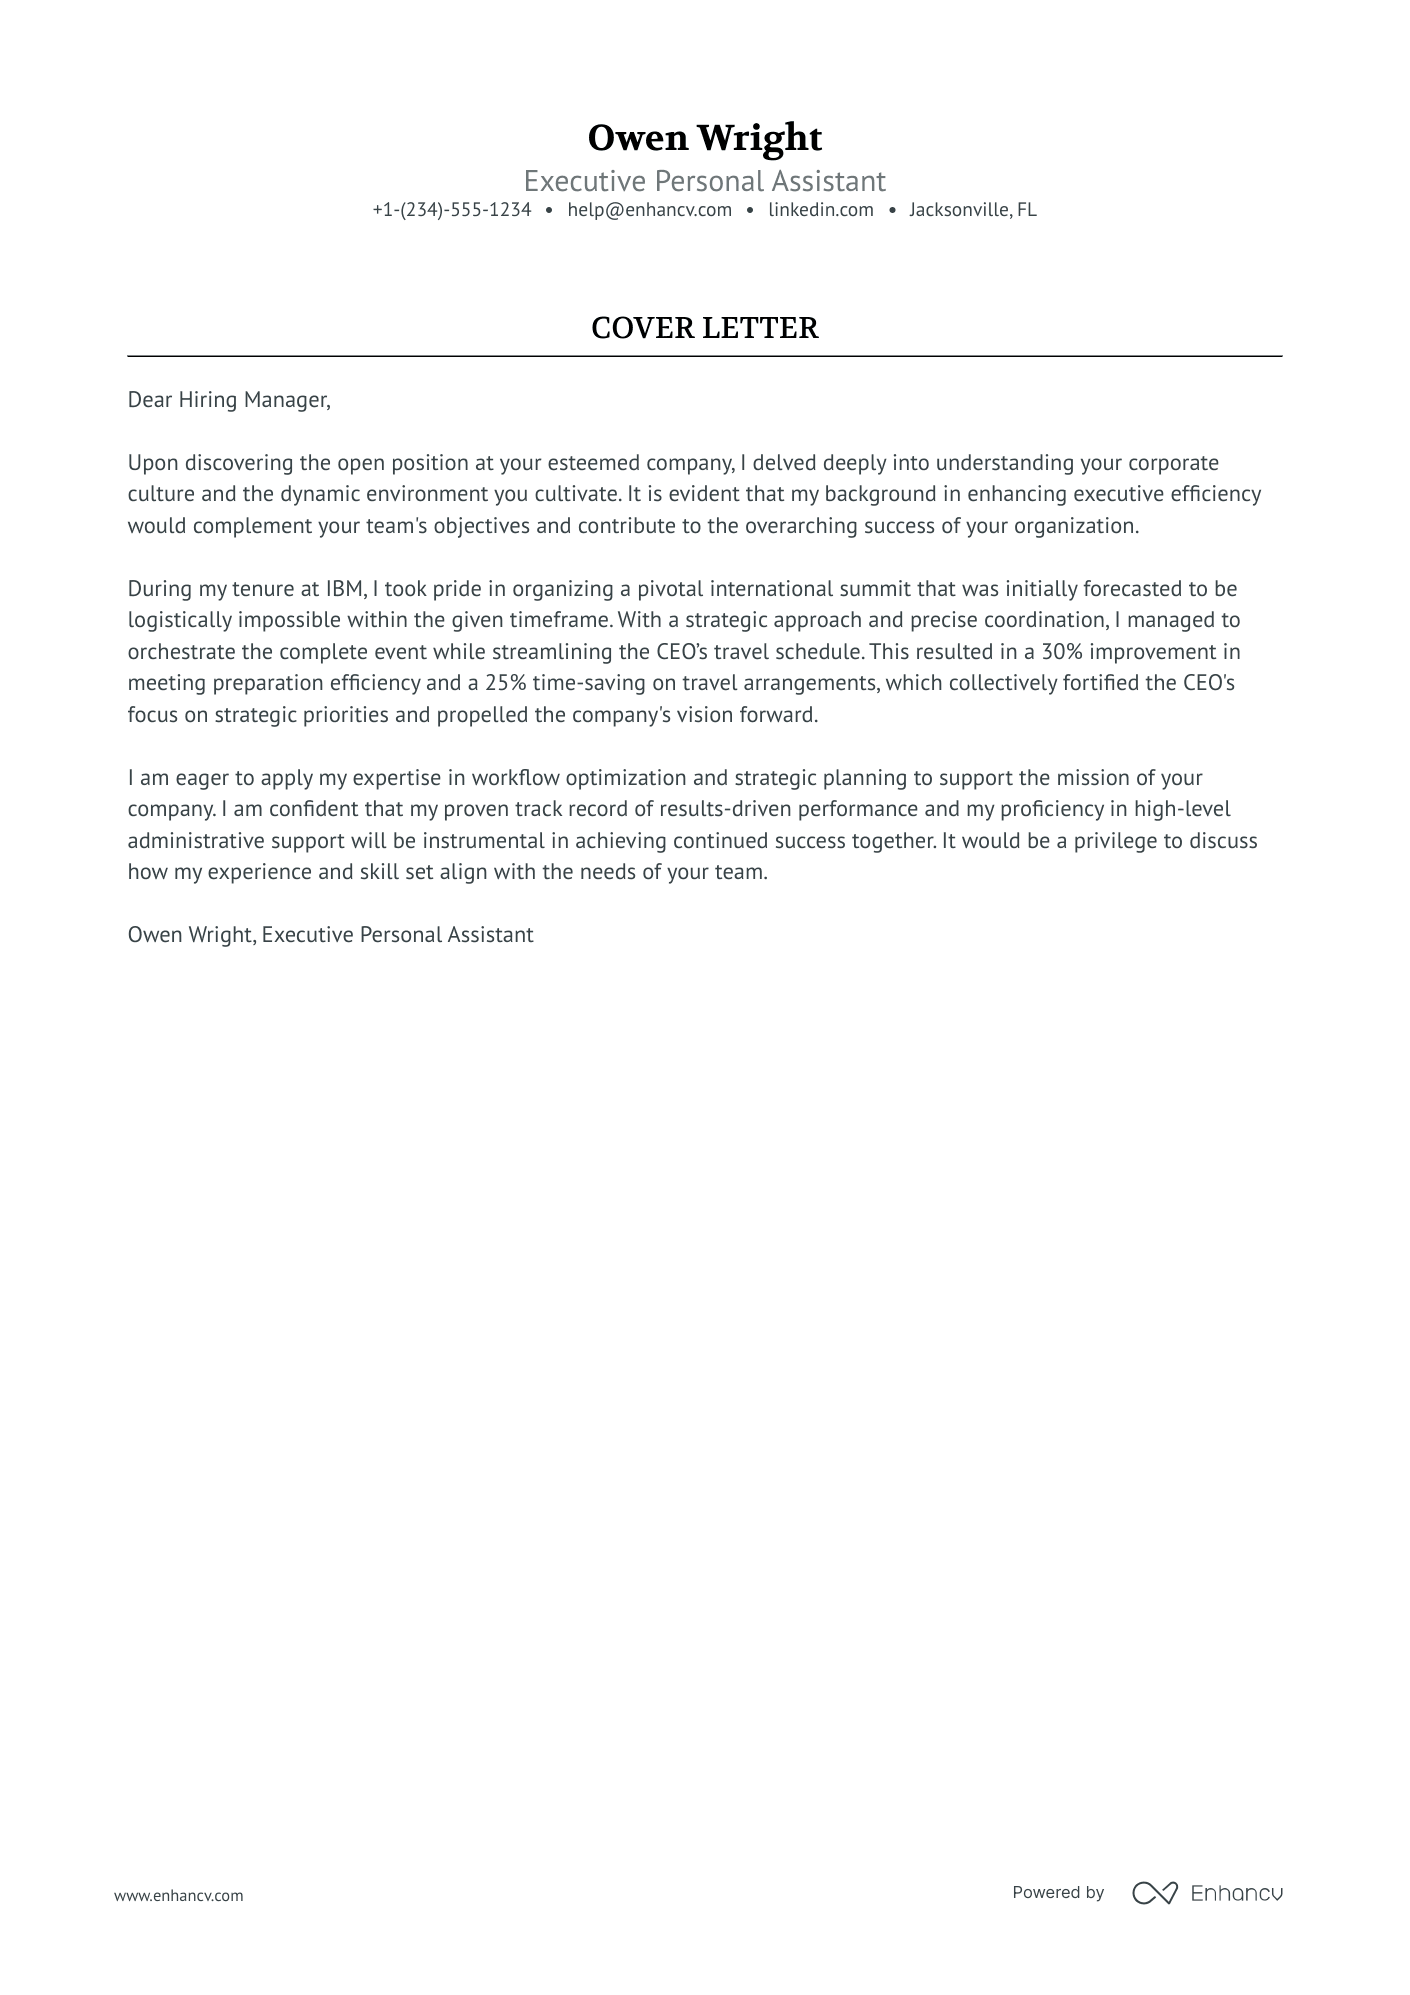 cover letter for personal assistant example